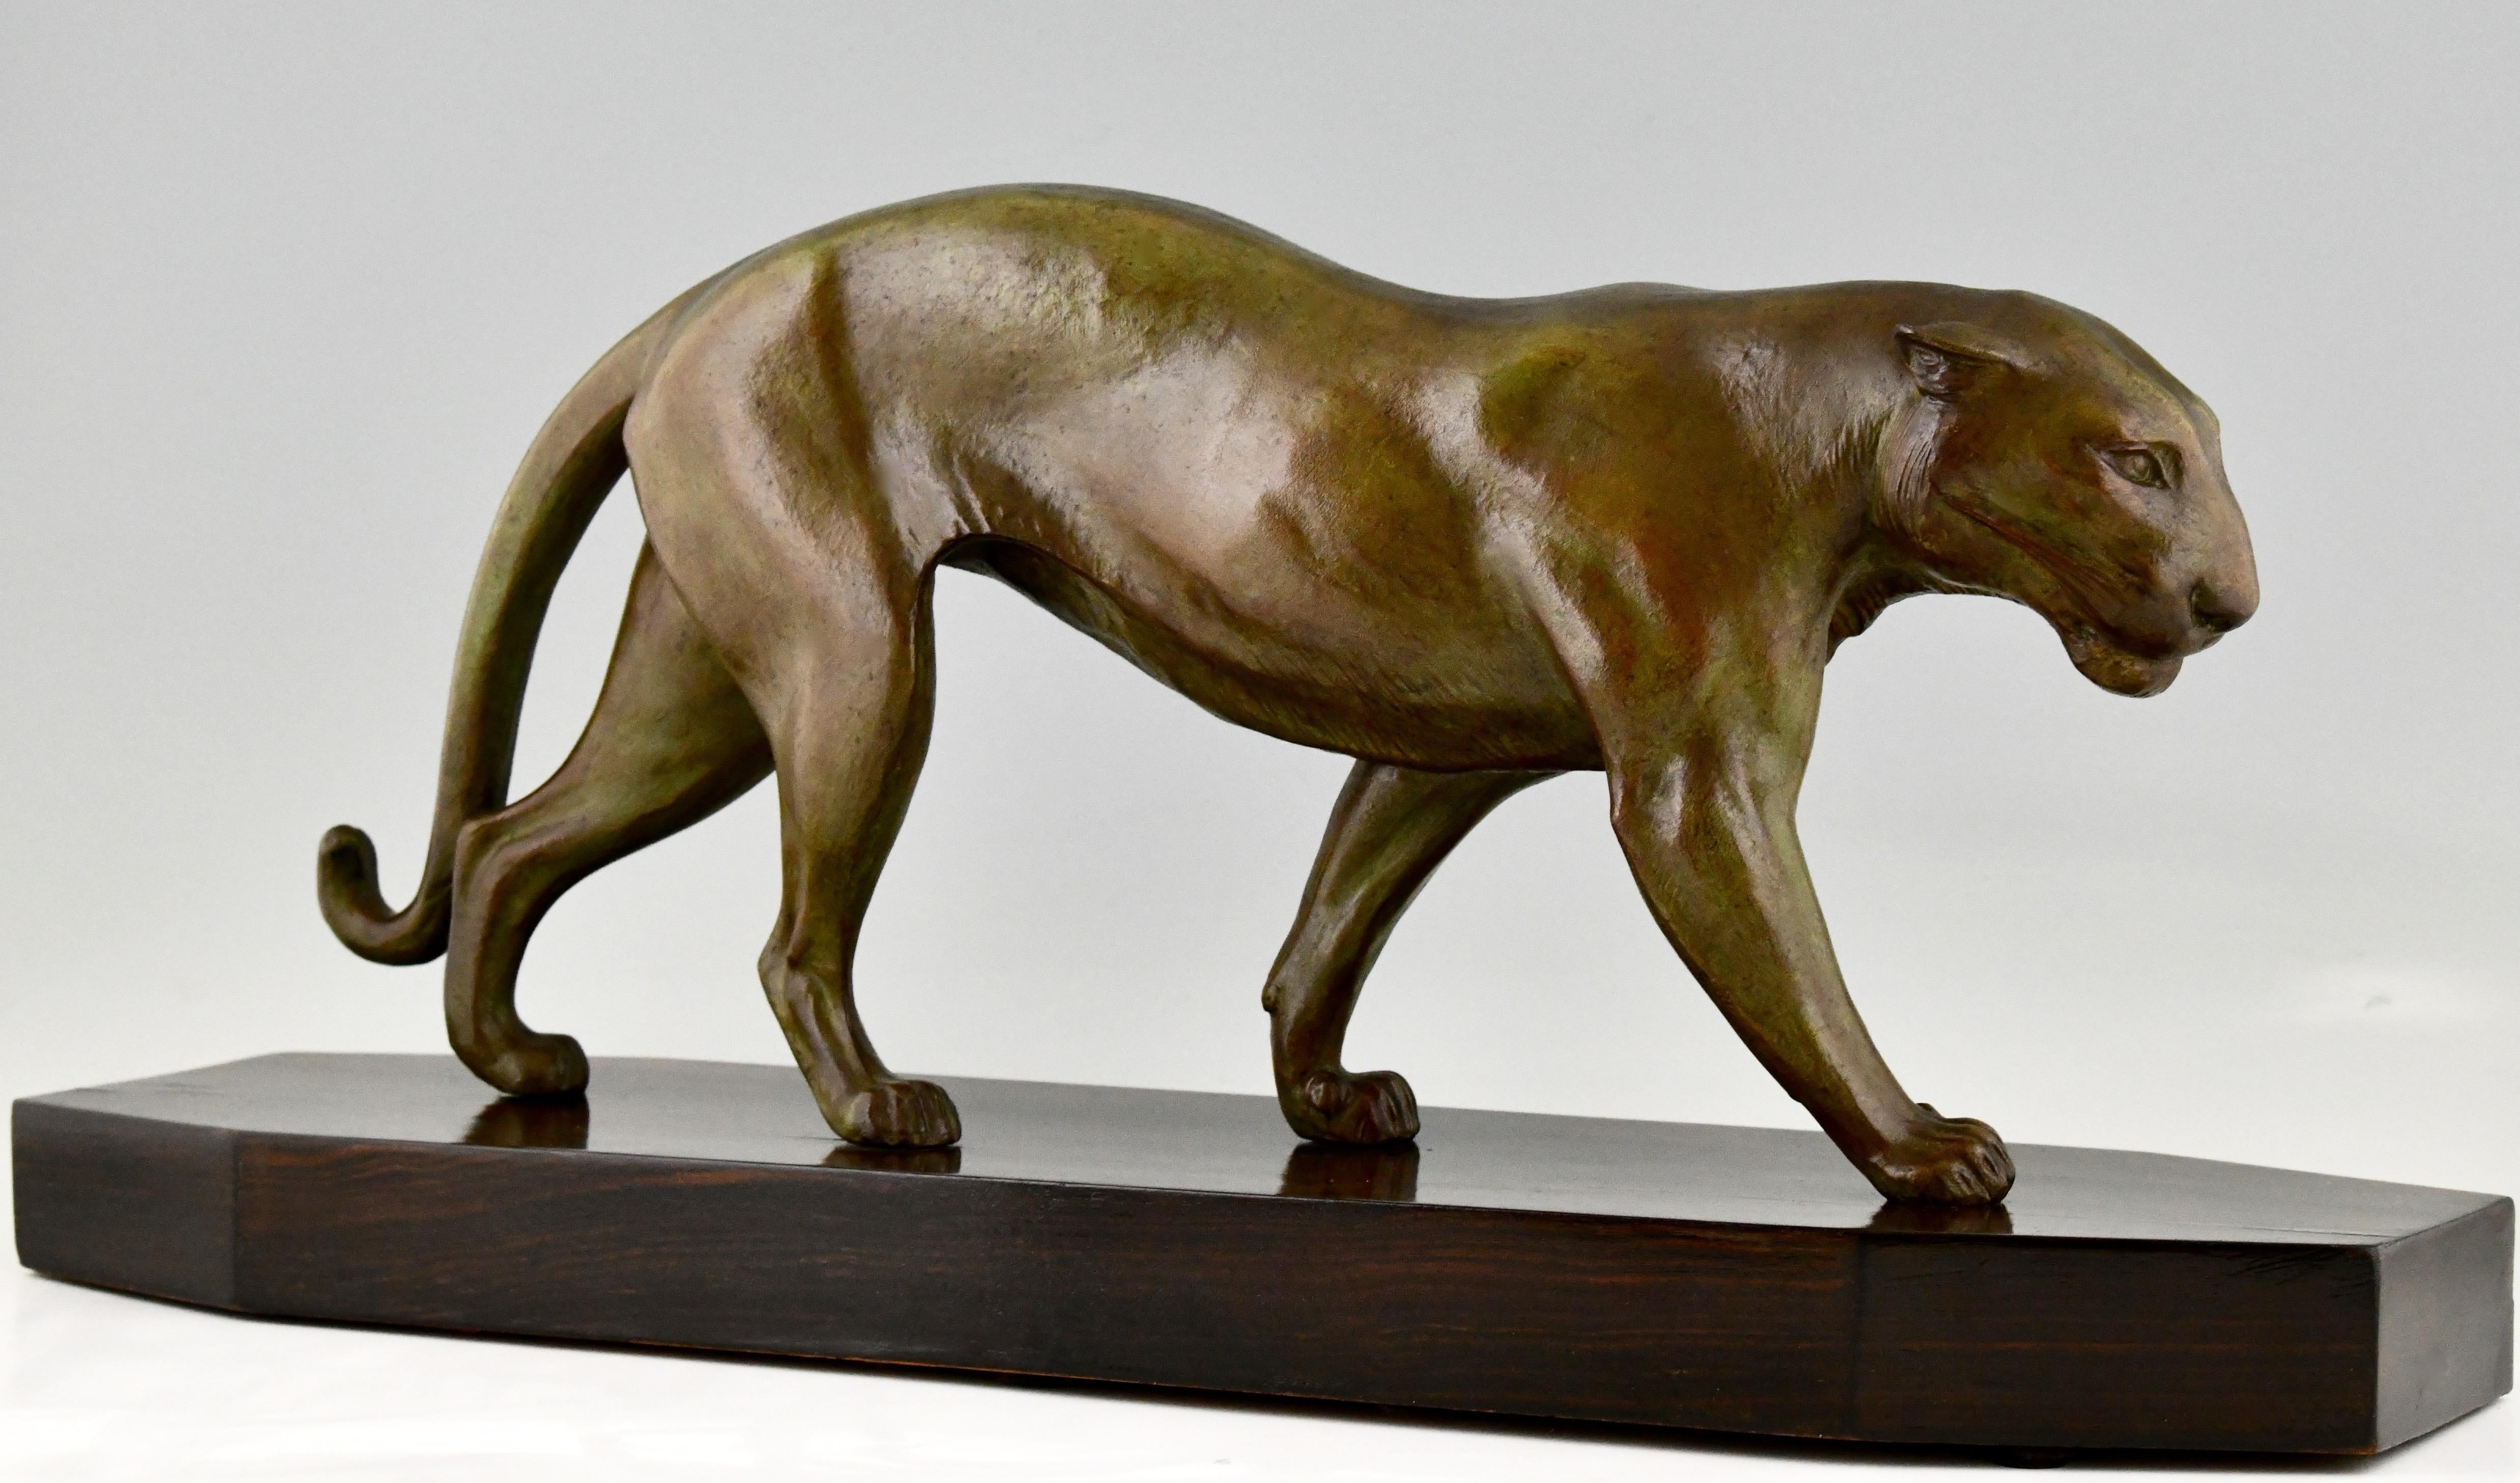 Elegant Art Deco sculpture of a panther by the French artist Robert Bousquet. Patinated metal on a fine Macassar wooden base. Ca. 1930.
Literature:
“Bronzes, sculptors and founders” H. Berman, Abage. ?